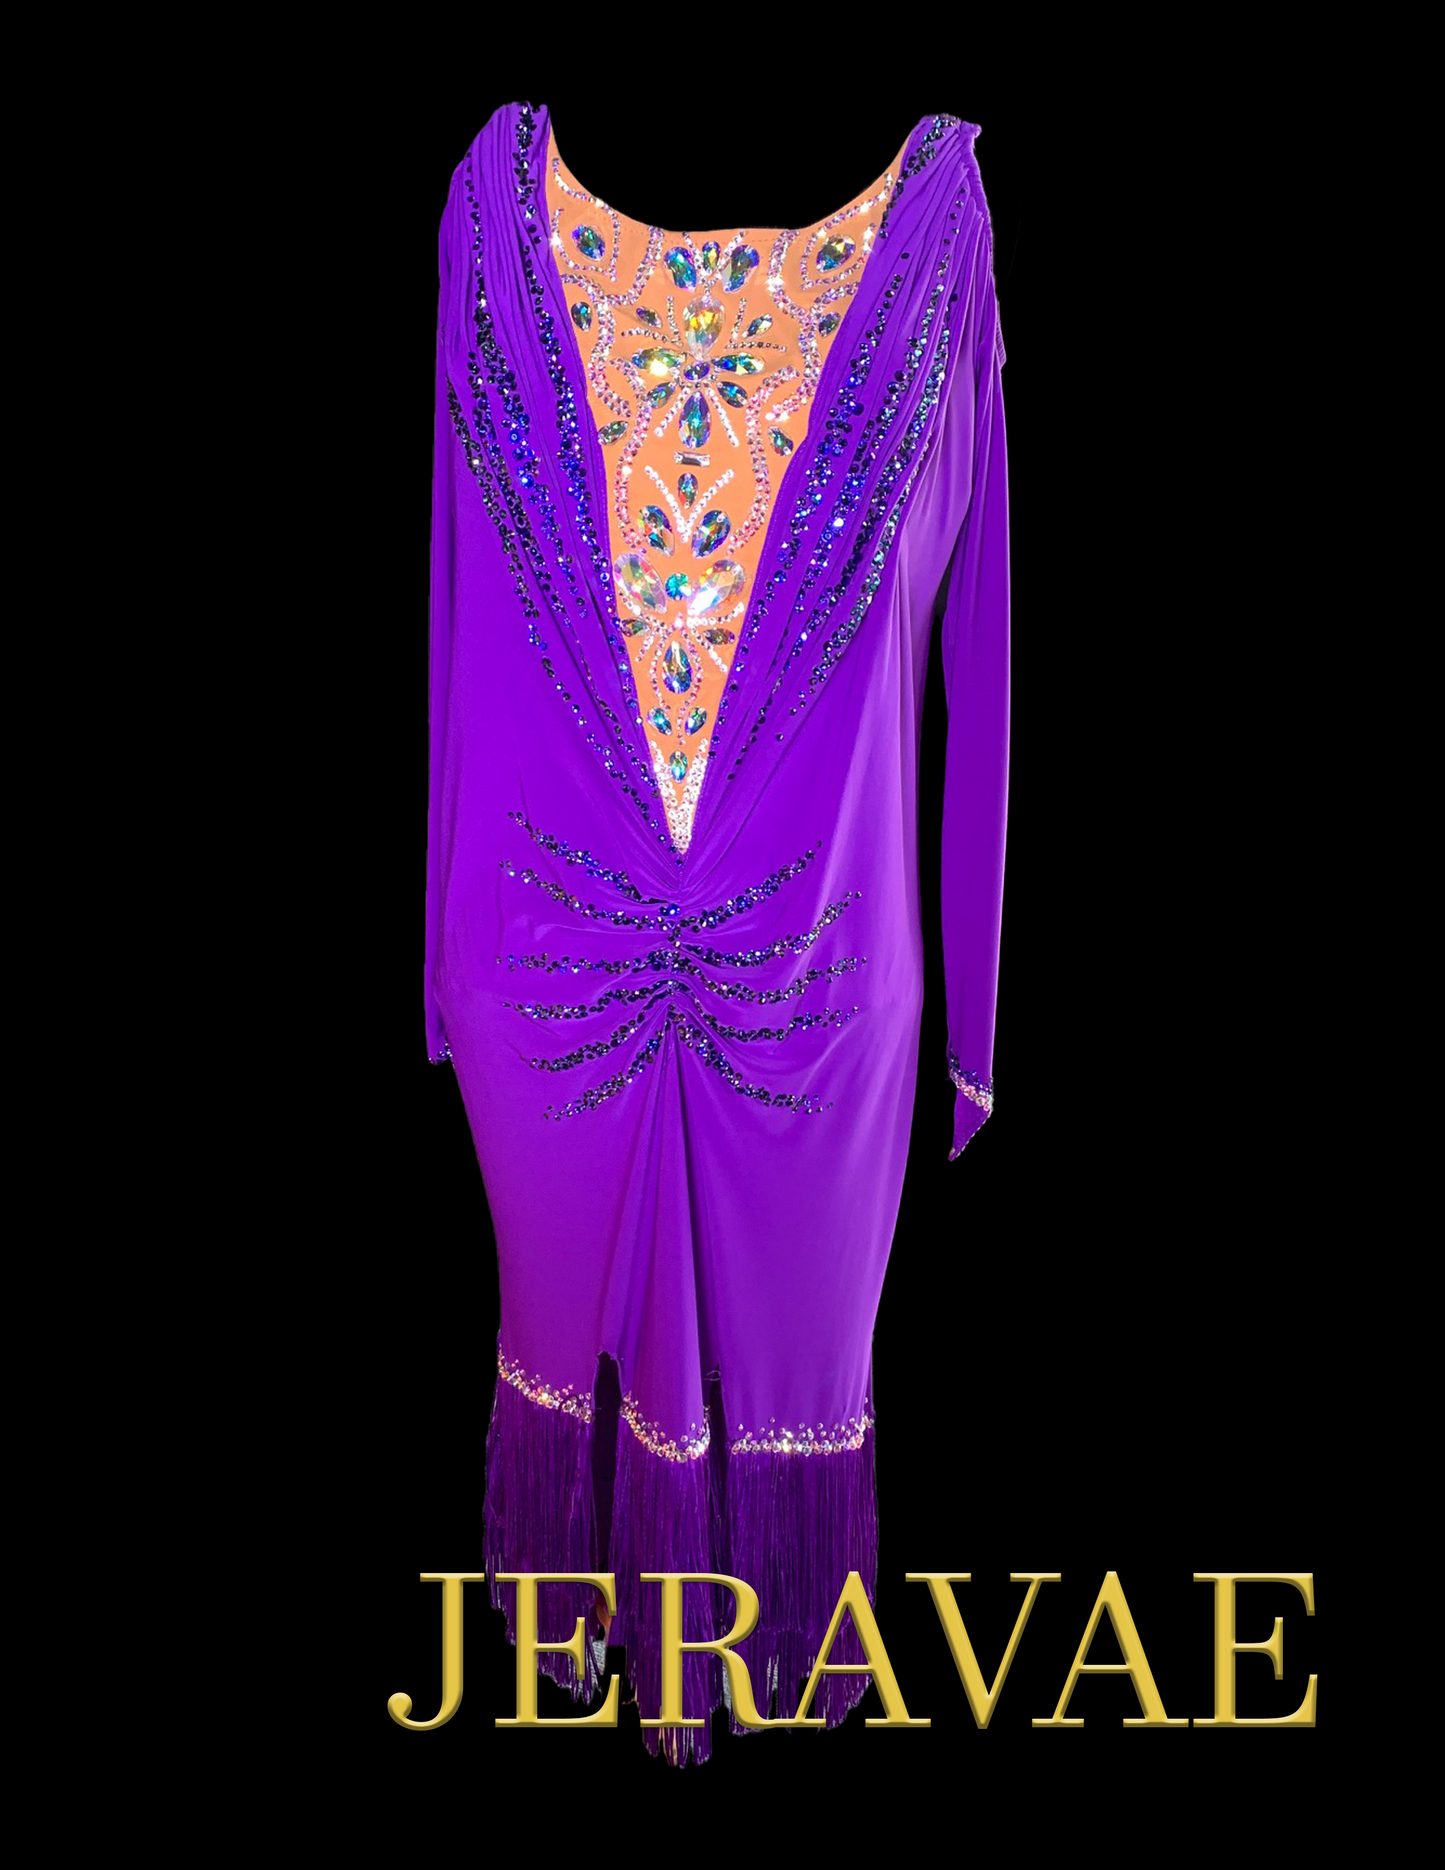 Resale Artistry in Motion Purple Latin Dress with Long Sleeves, Ruching on Front and Back, Swarovski Stones, and Slit Skirt with Fringe Hem Sz L/XL Lat179